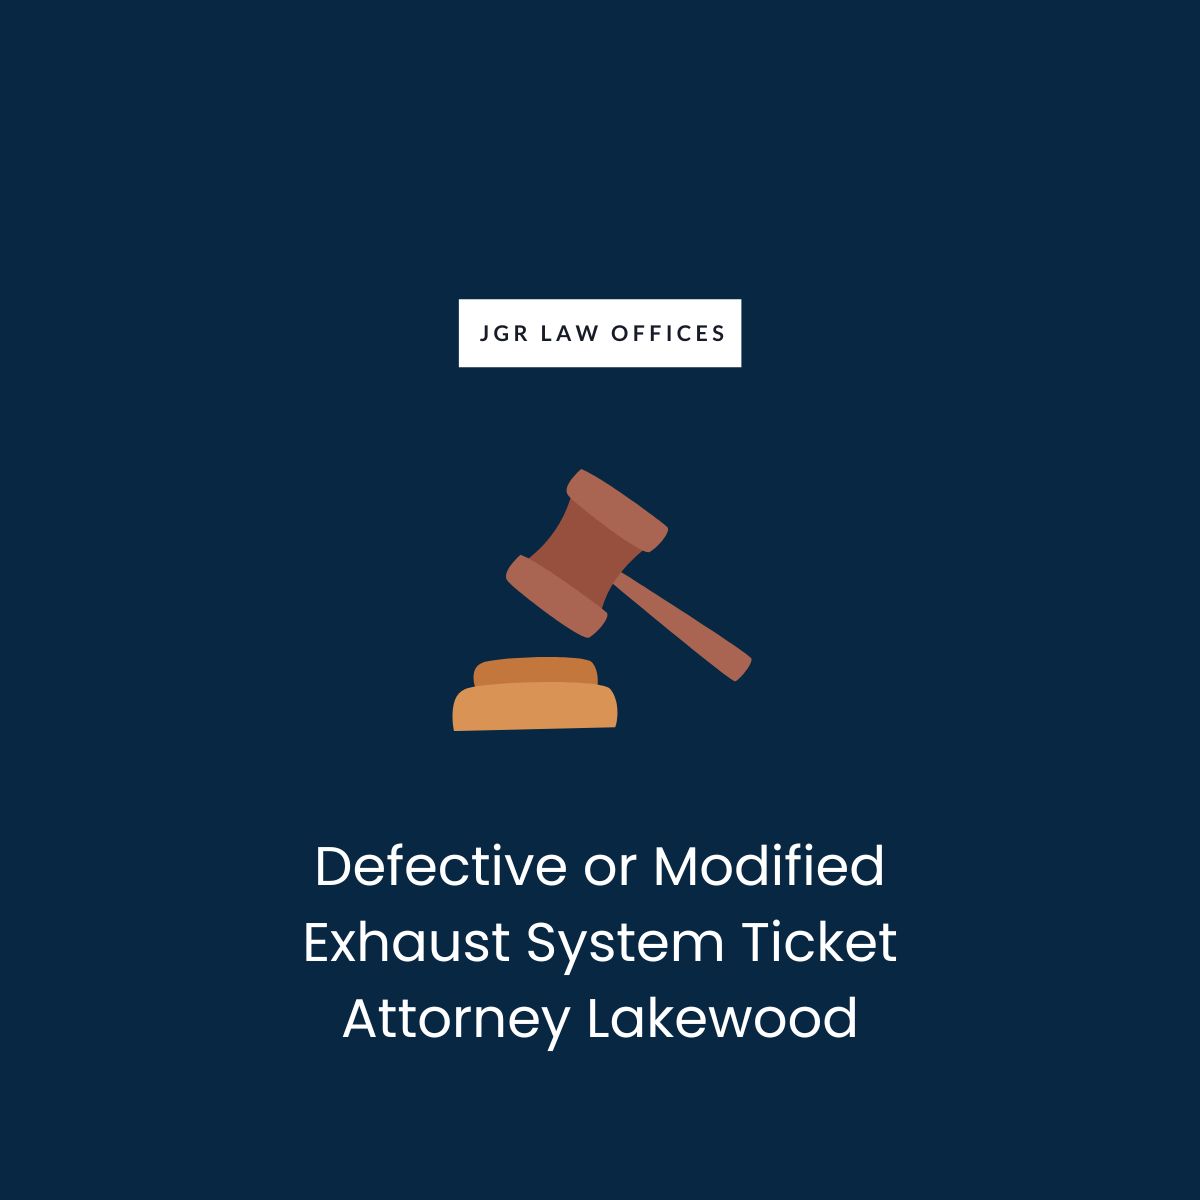 Defective or Modified Exhaust System Ticket Attorney Lakewood